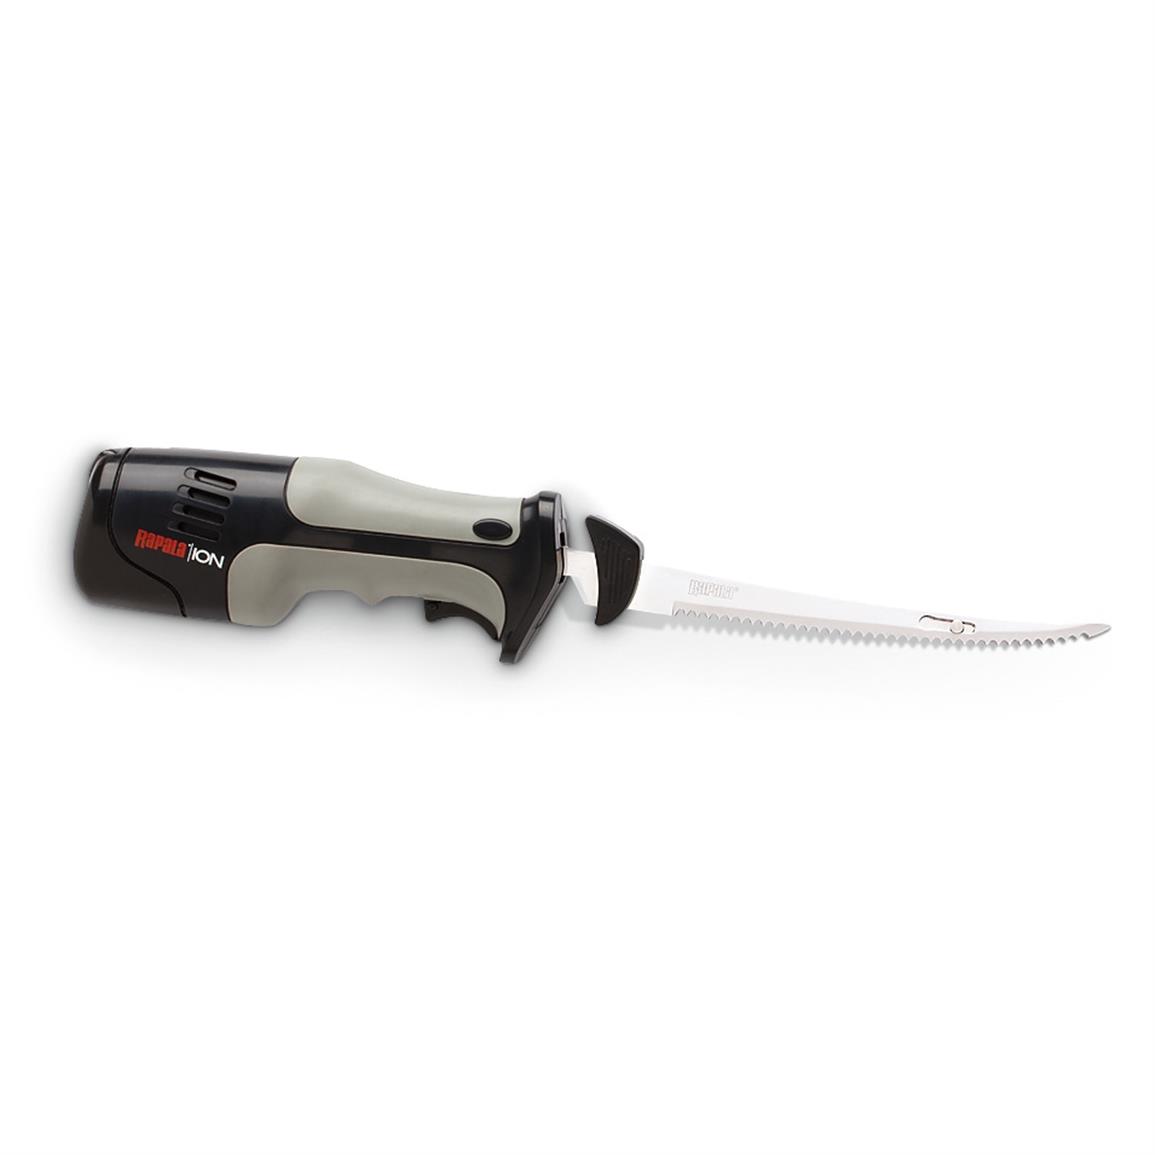 Rapala Rechargeable Lithium-ion Fillet Knife